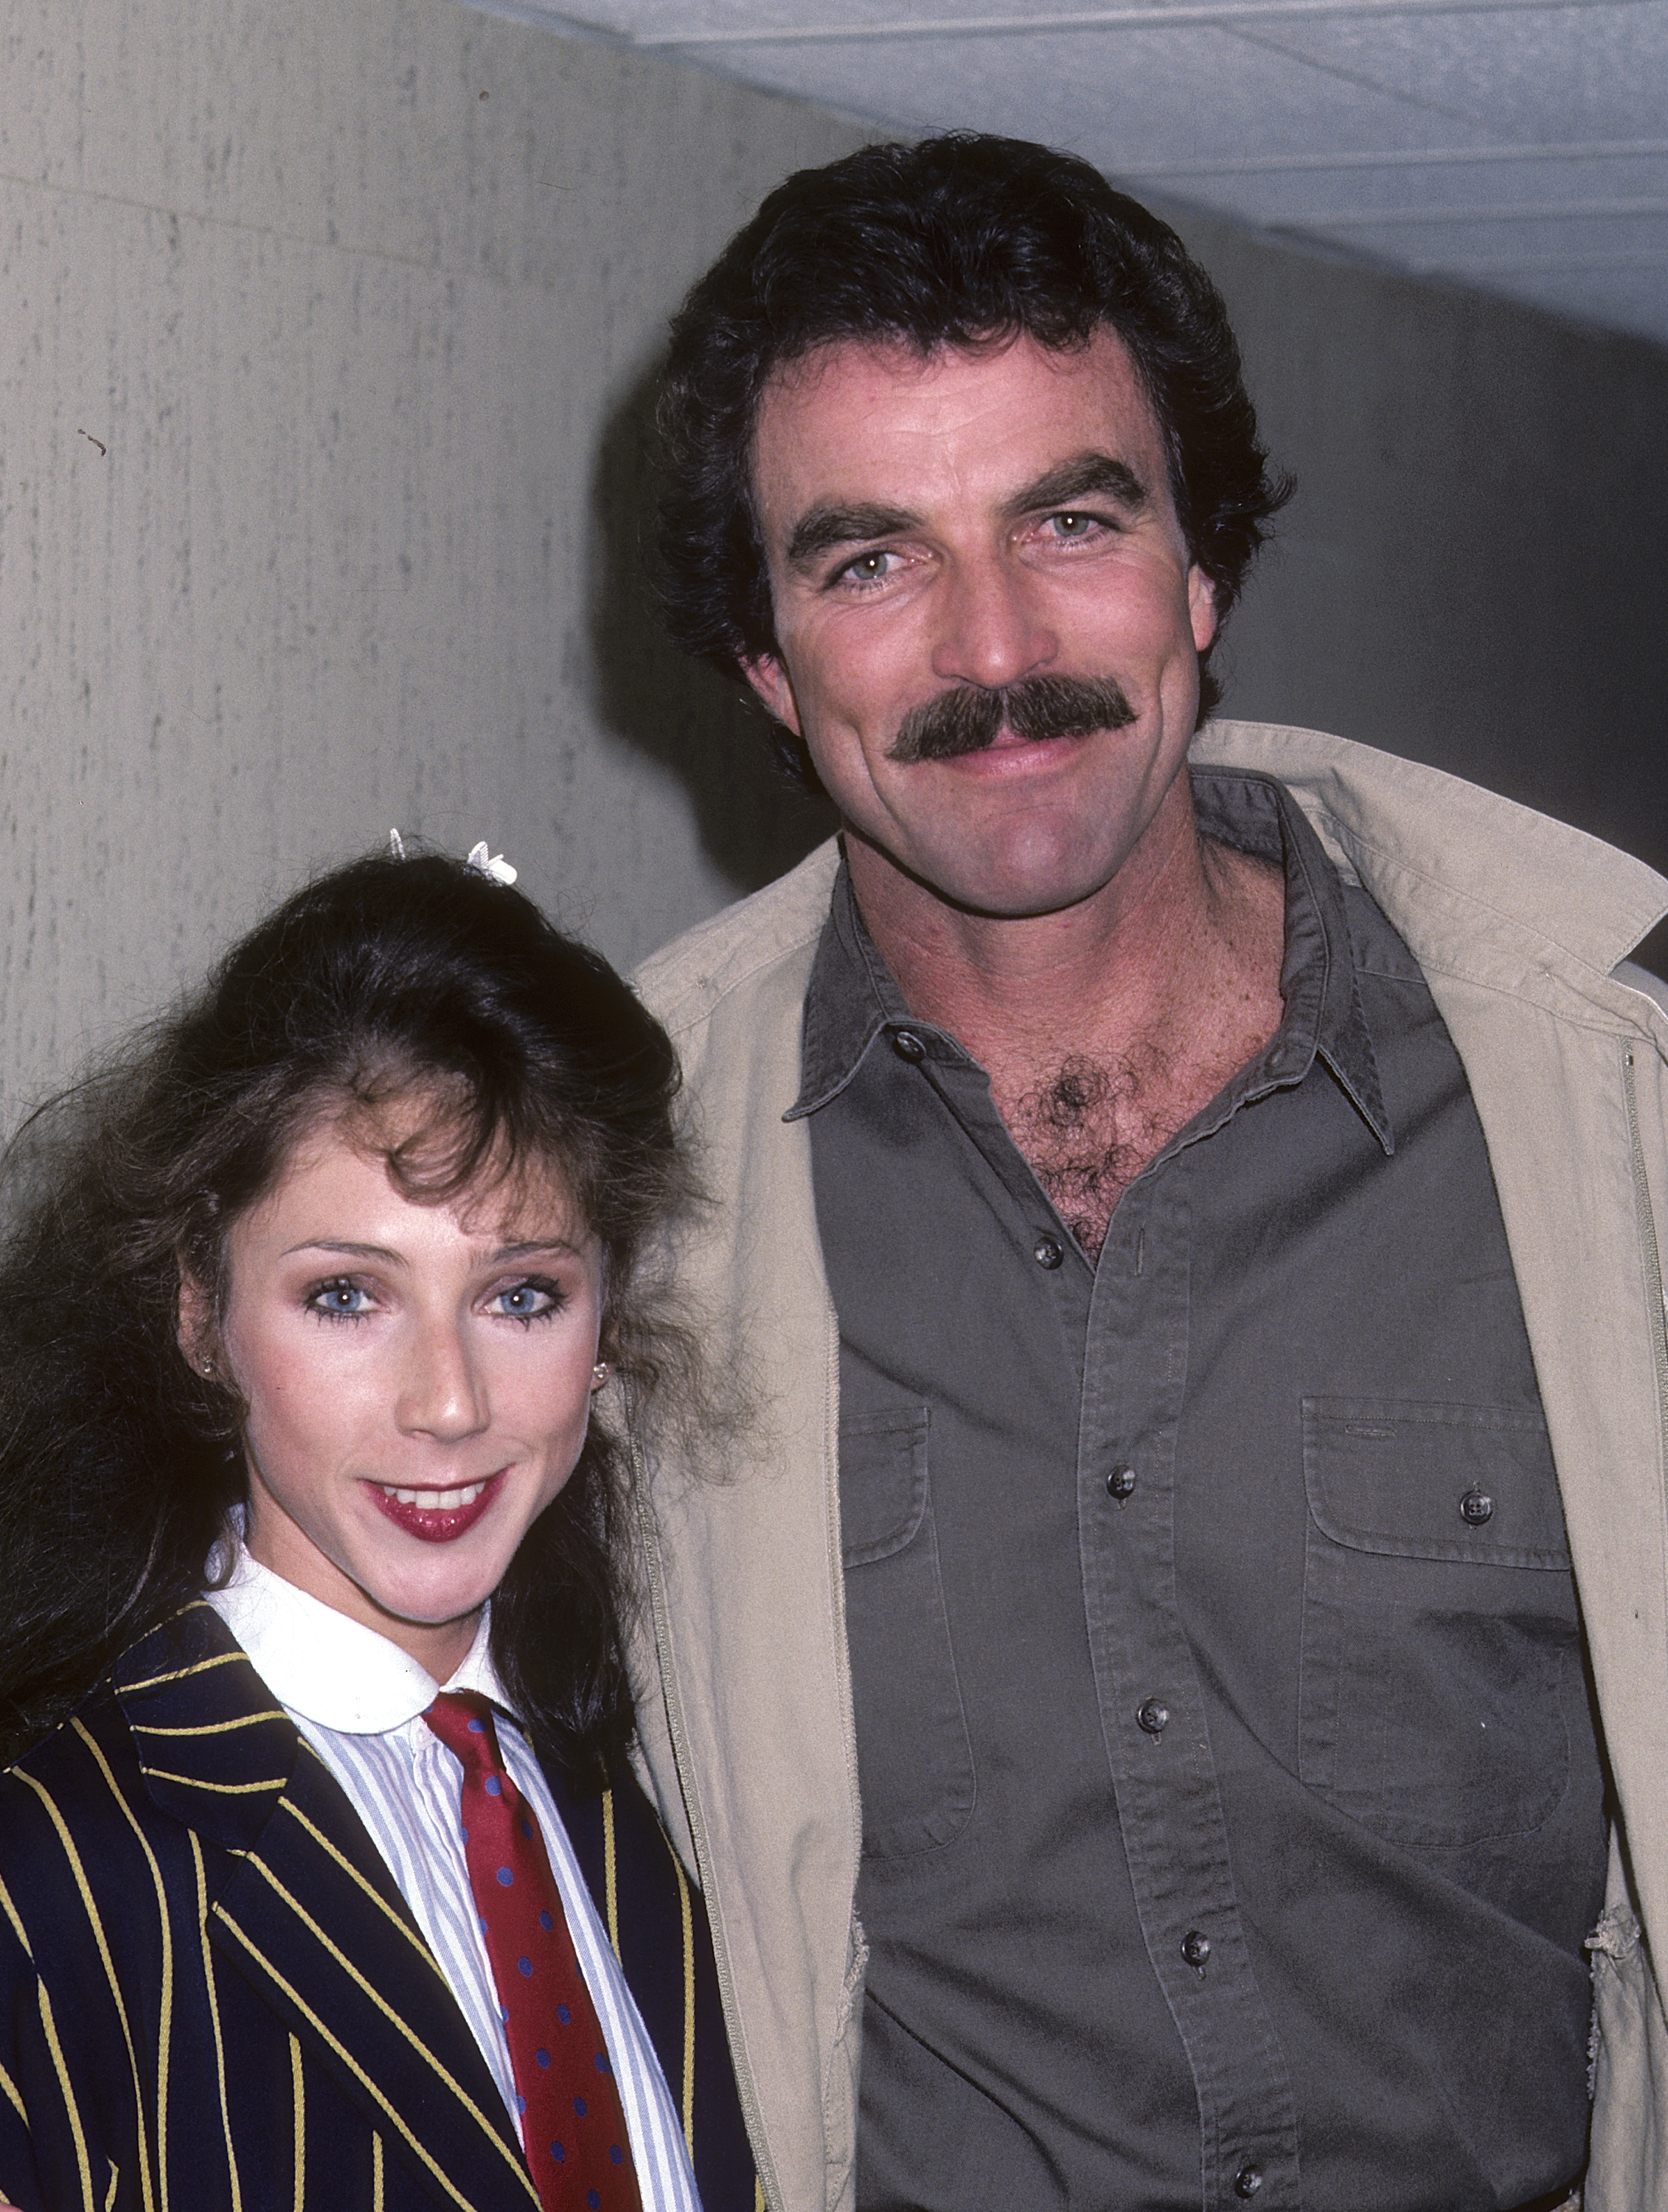 Tom Selleck and Jillie Joan Mack leaving "The Late Show with David Letterman" in New York in 1985 | Source: Getty Images